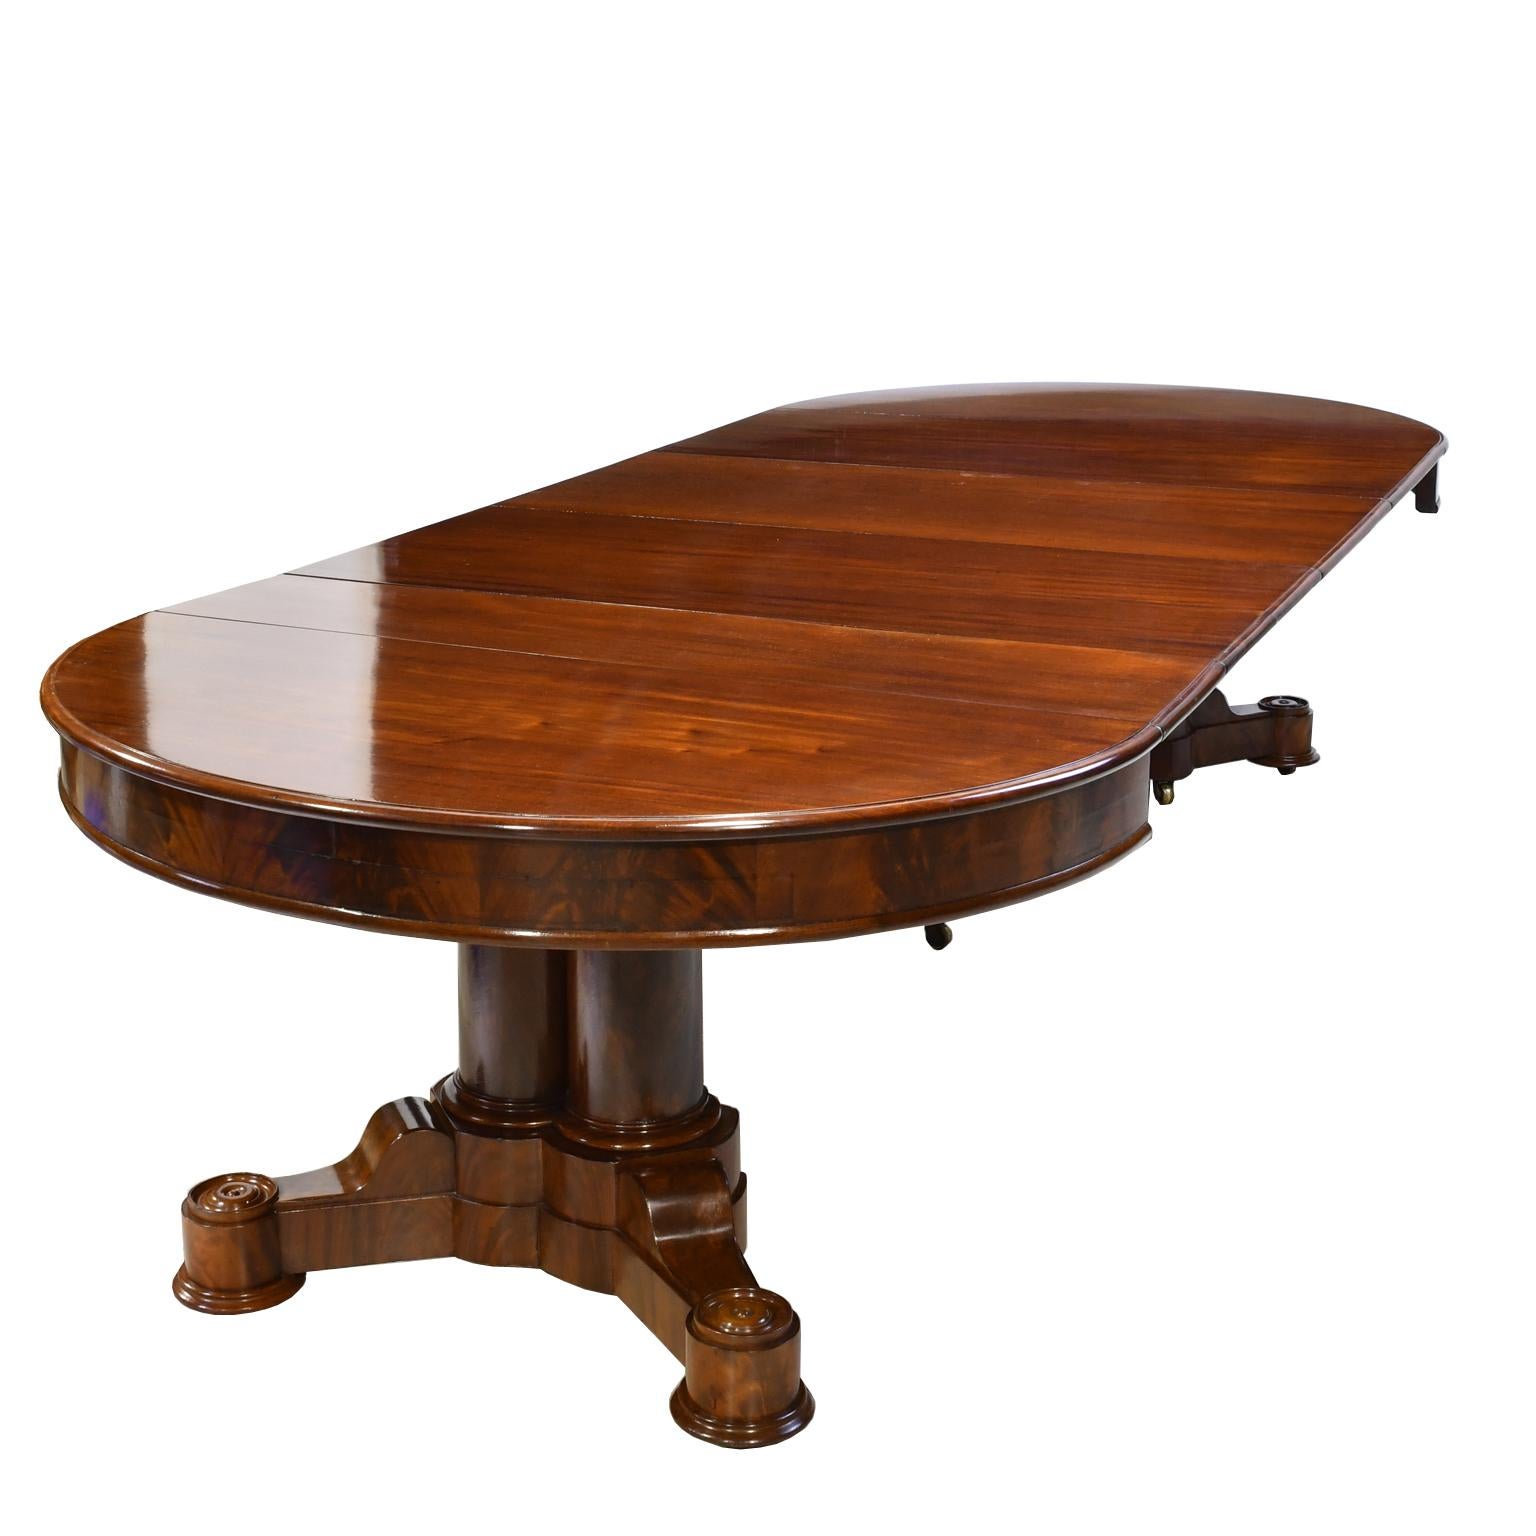 American Empire Oval Extension Dining Table in Mahogany with Pedestal Base 8